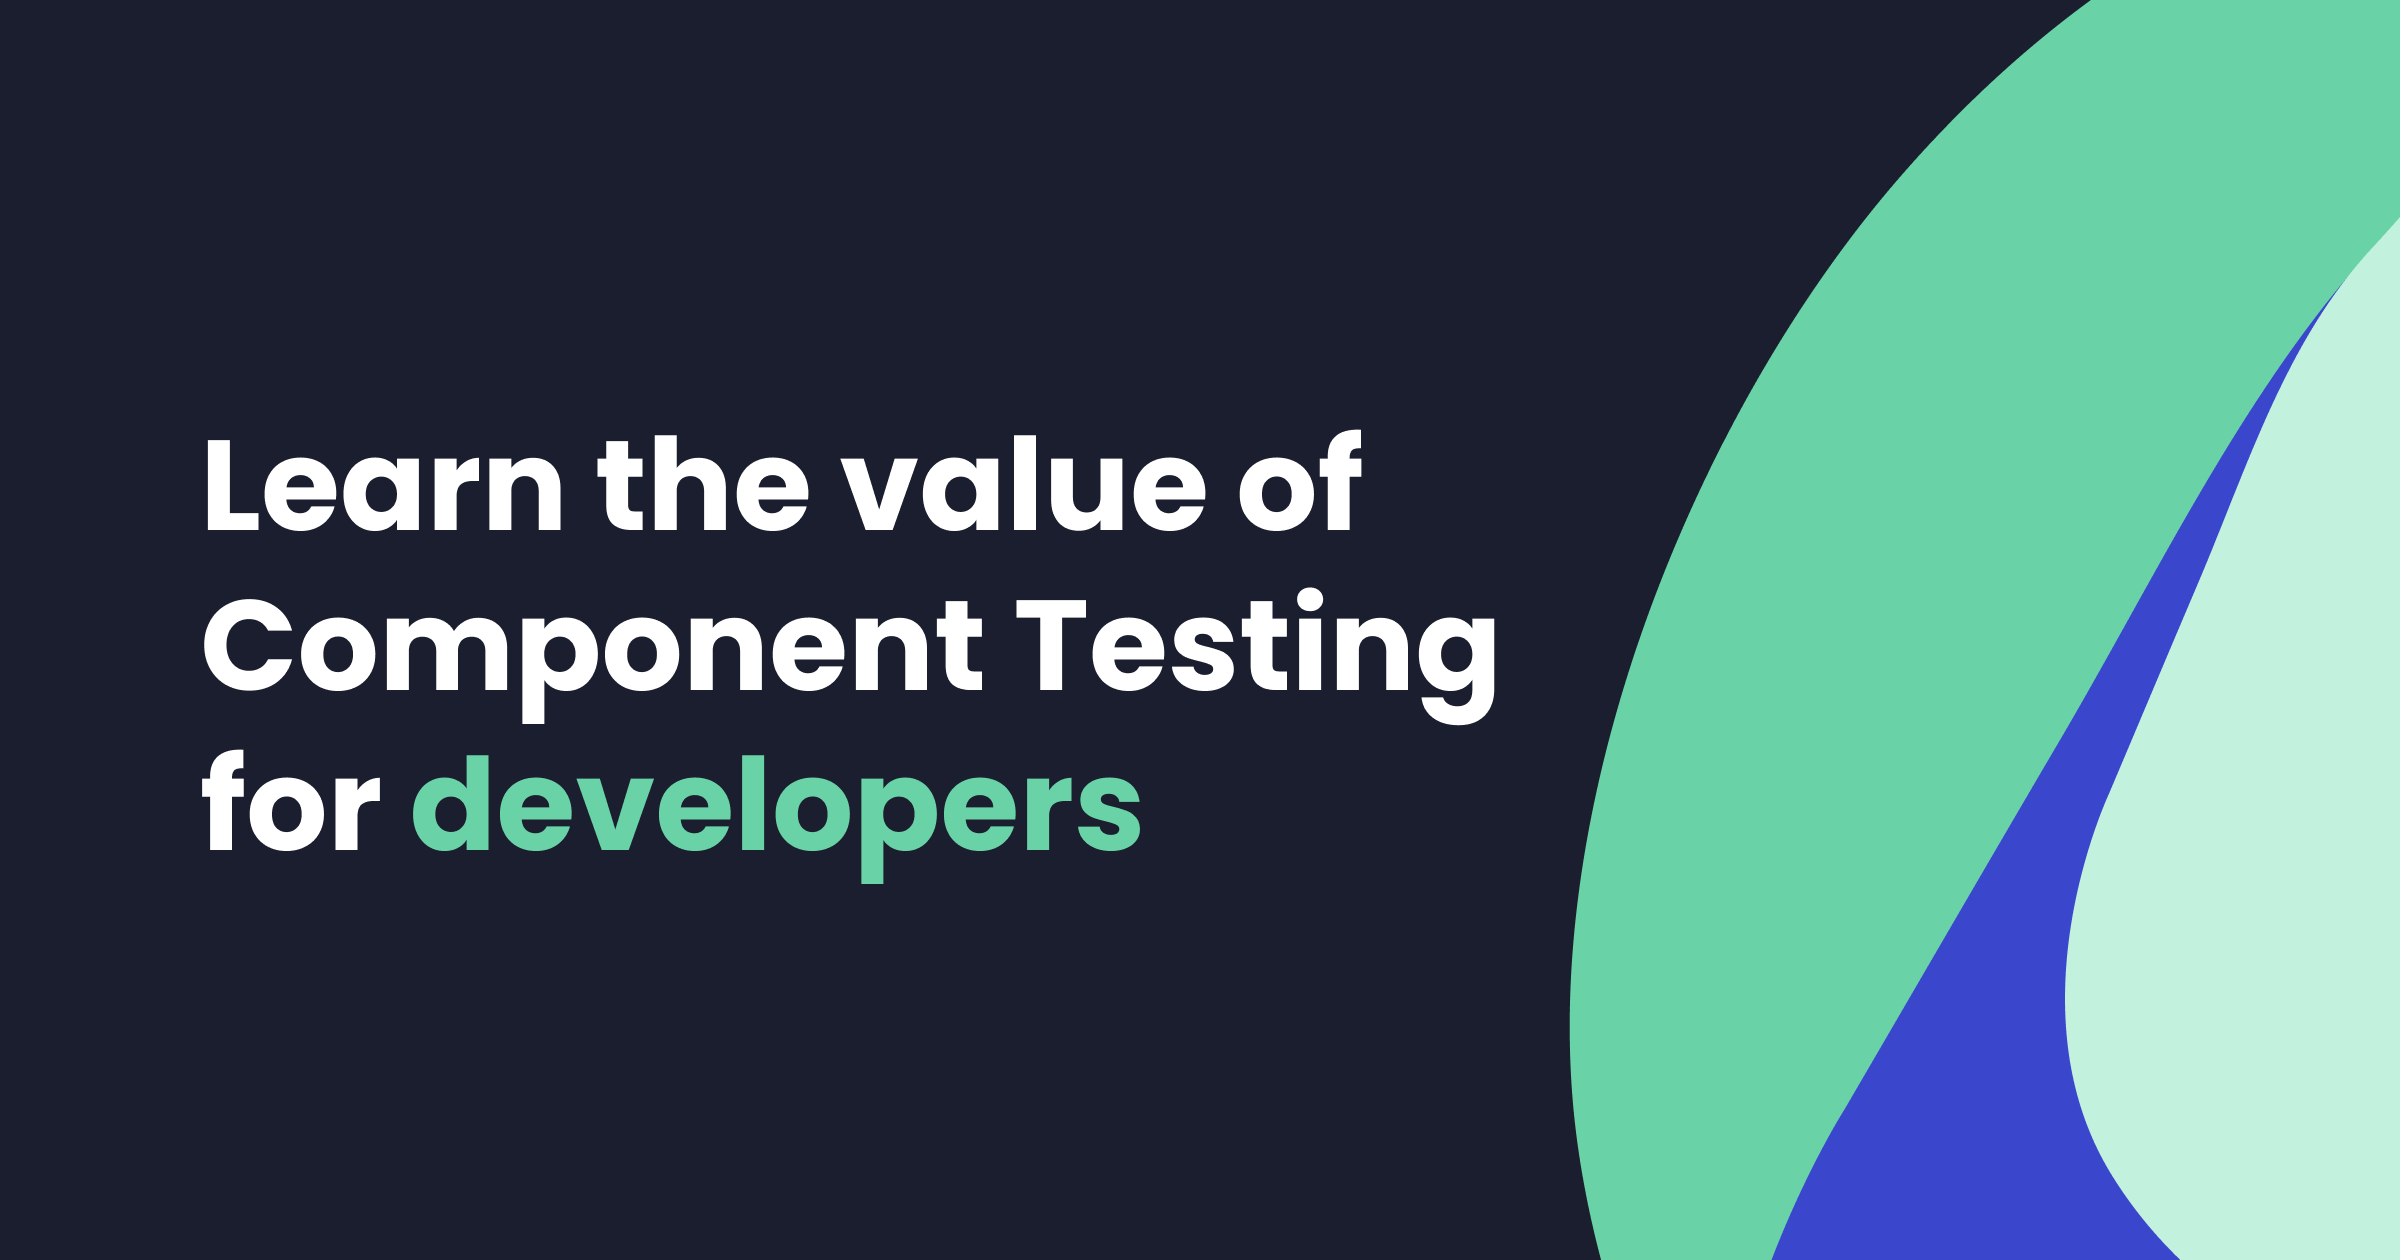 Learn the value of component testing for developers